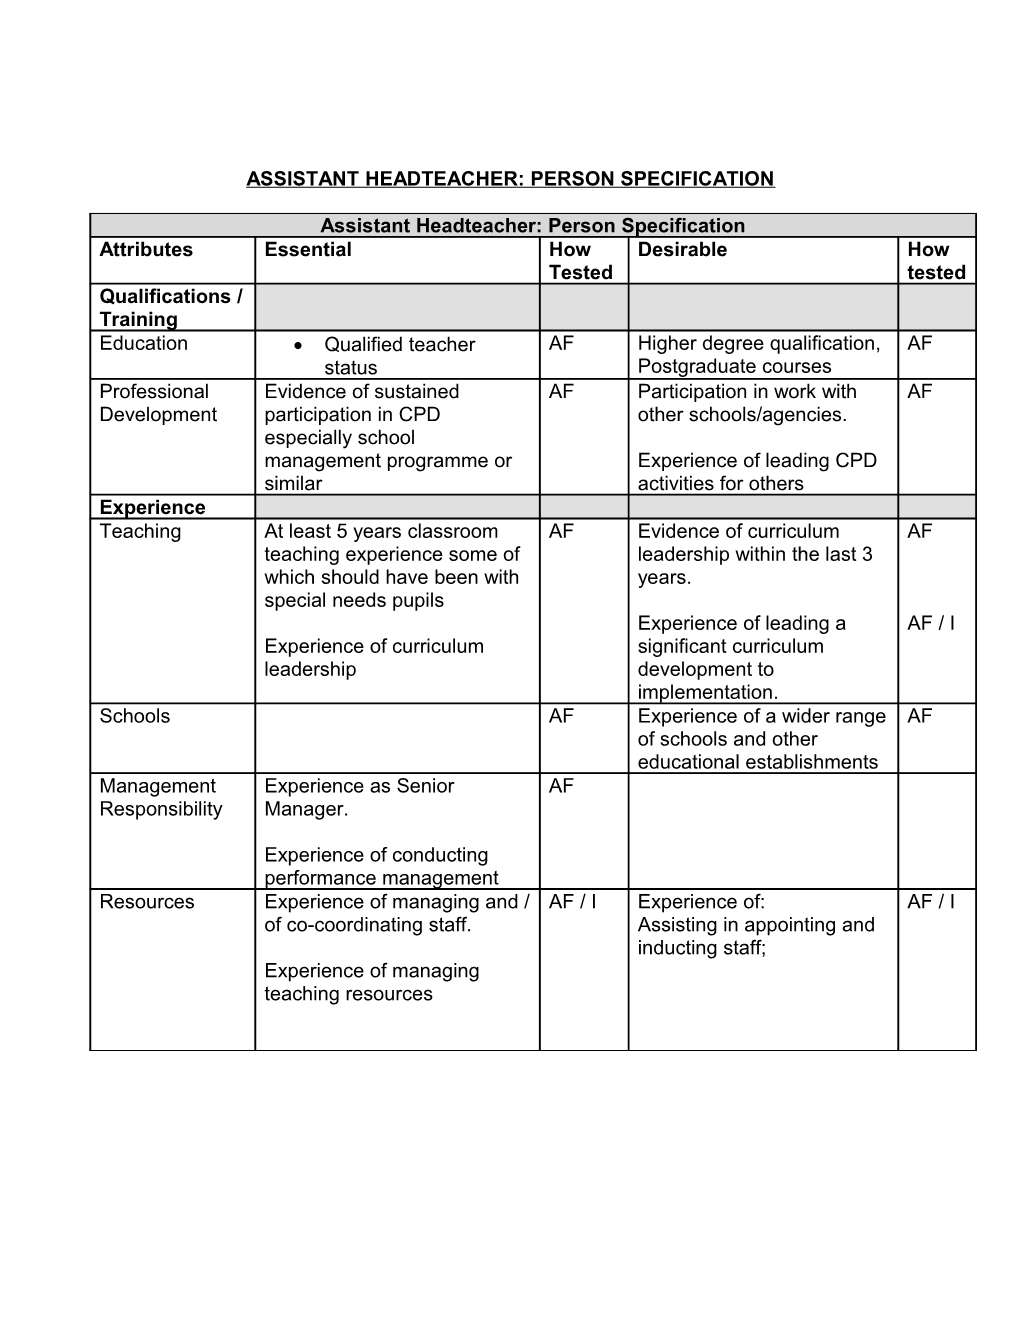 Assistant Headteacher: Person Specification